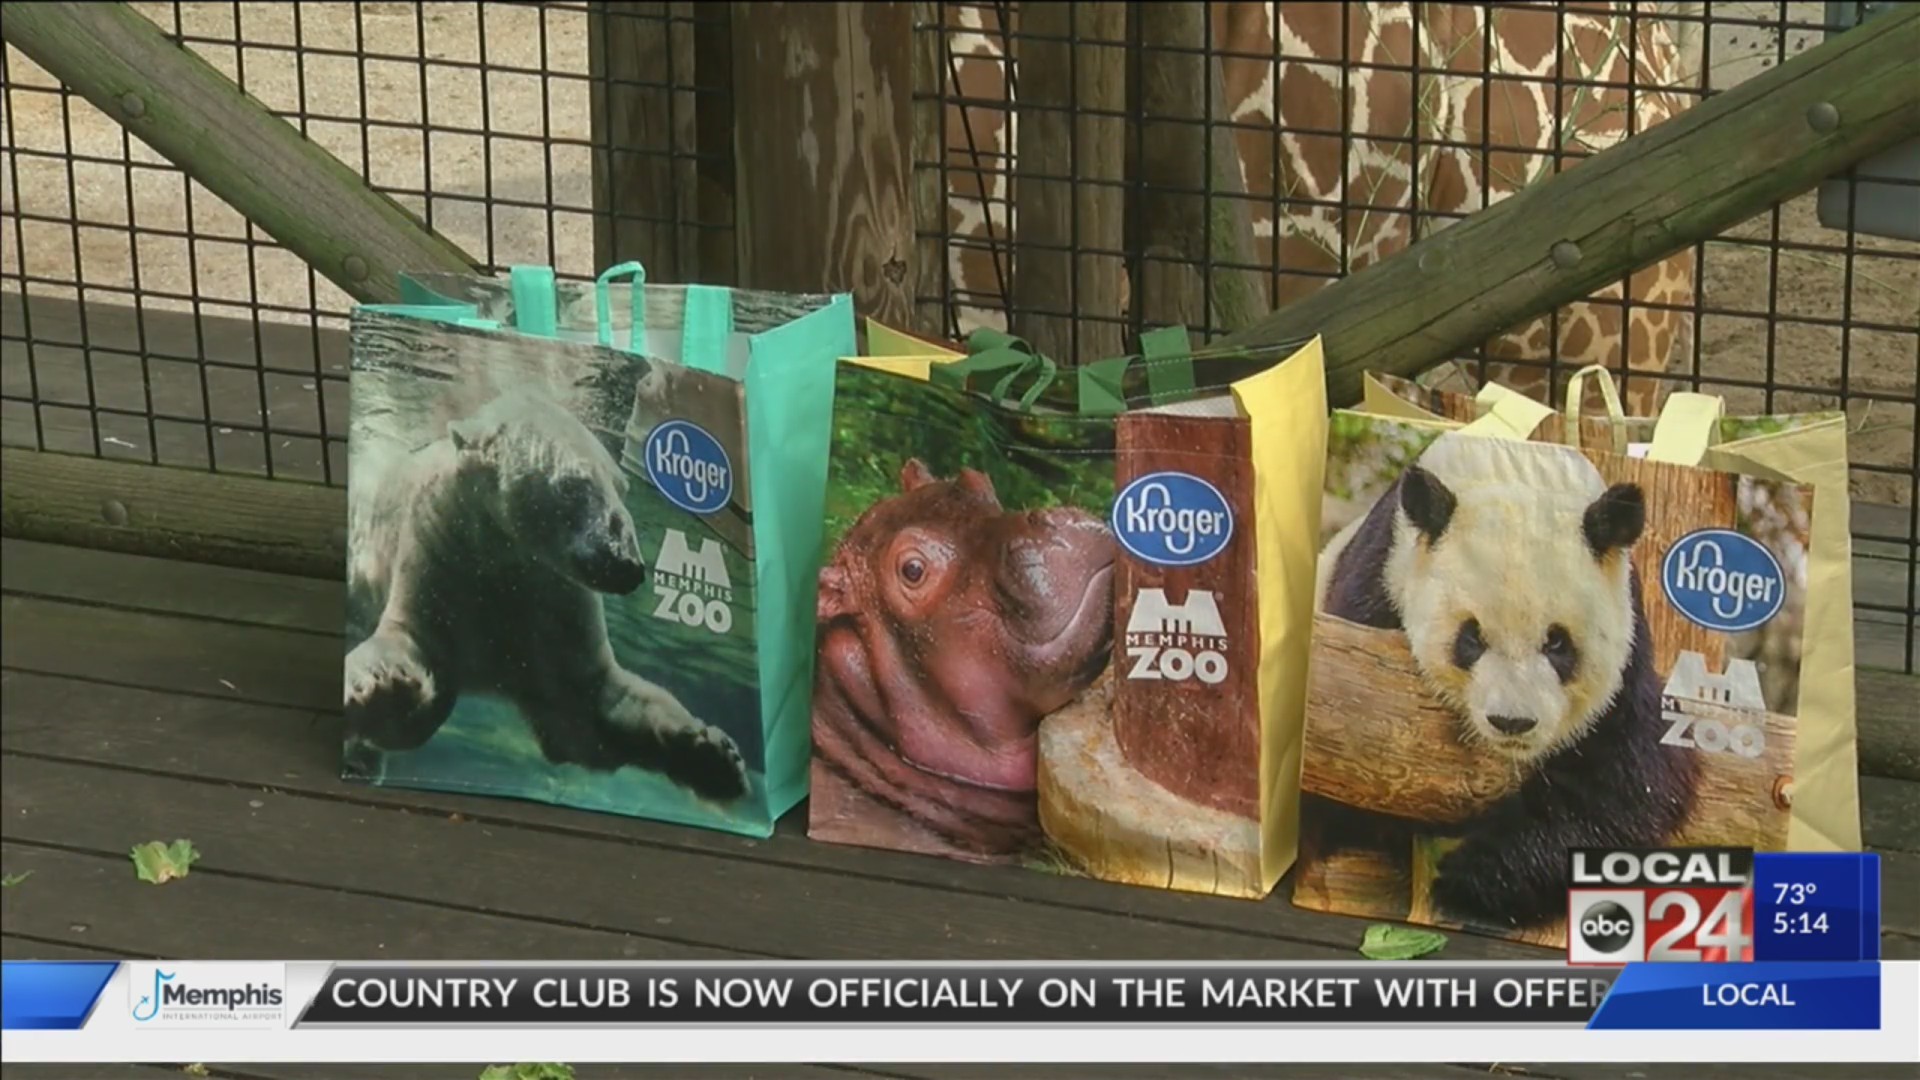 Memphis Zoo and Kroger unveil specialty brand of reusable bags